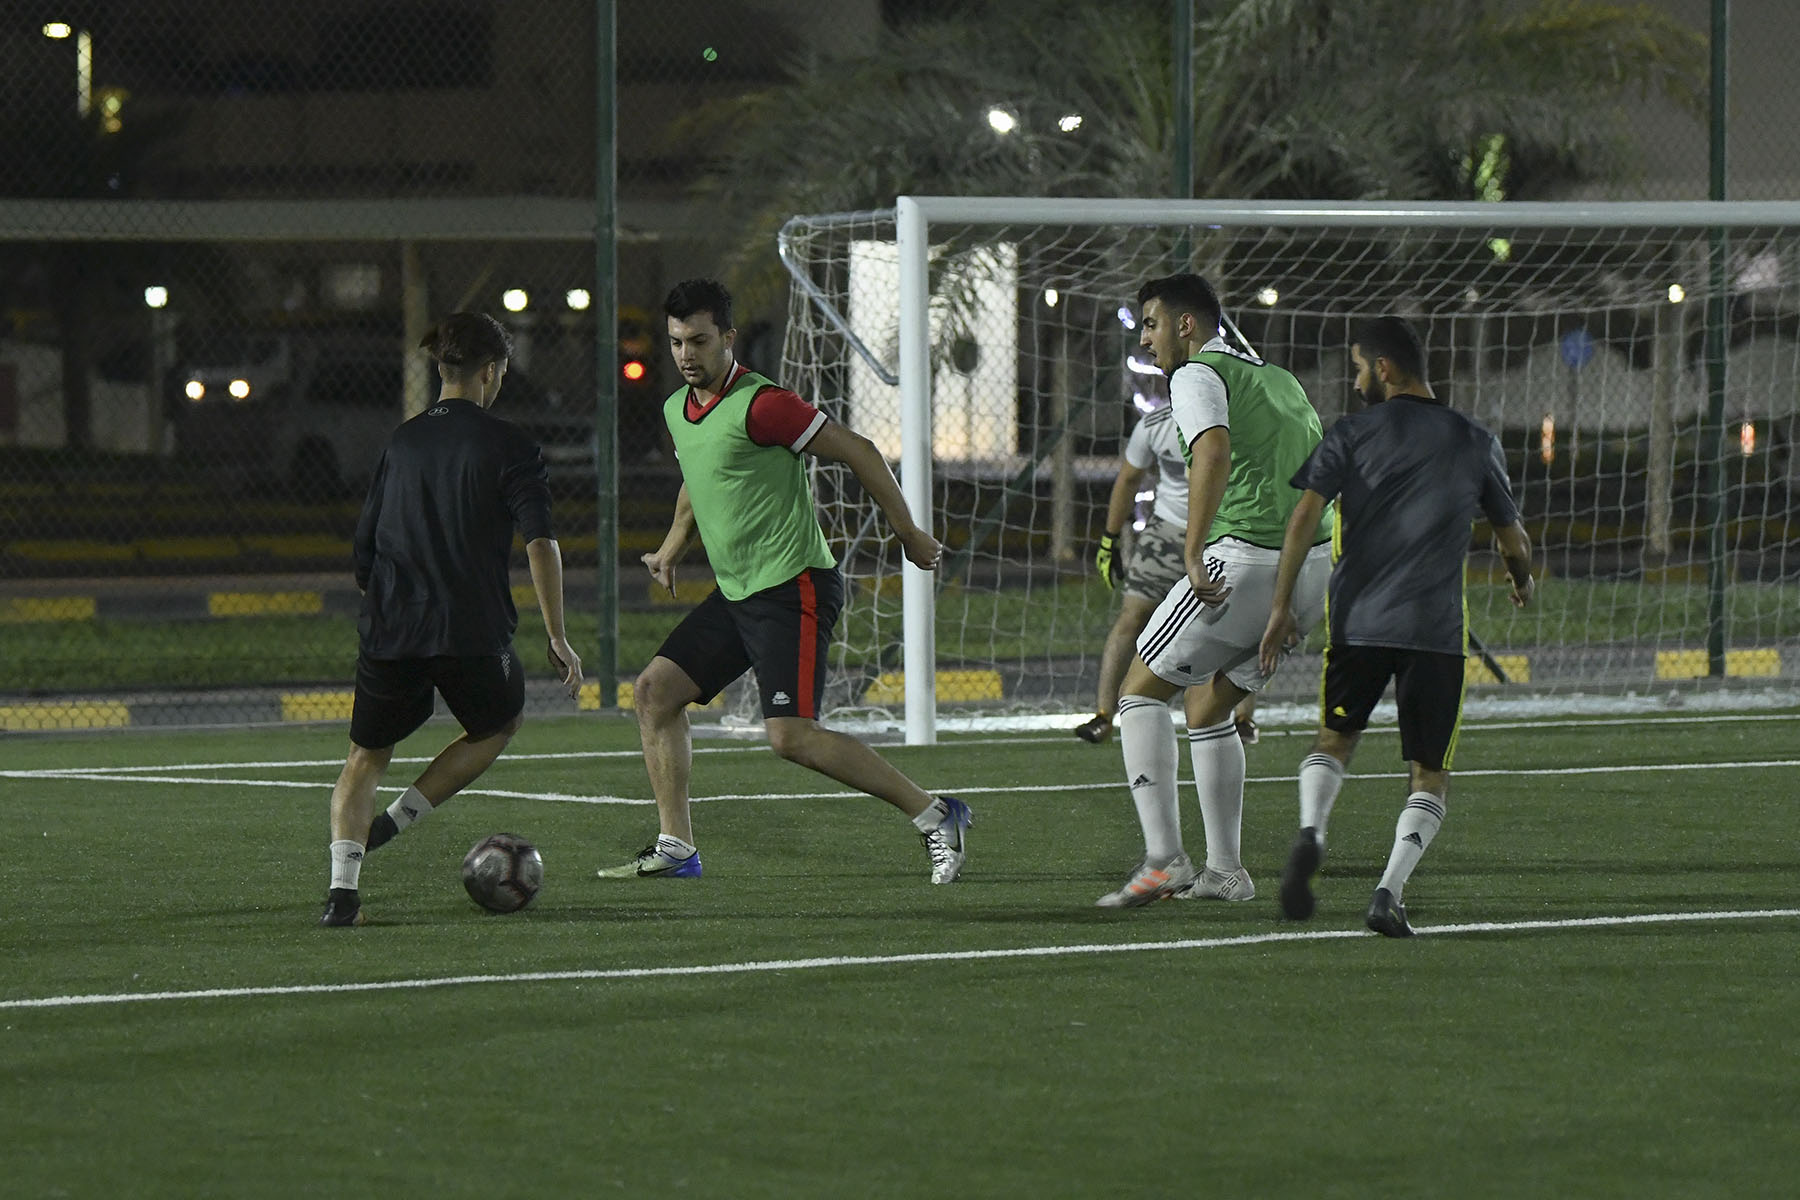 Al Malaki vs Law Students - Play-off for third place